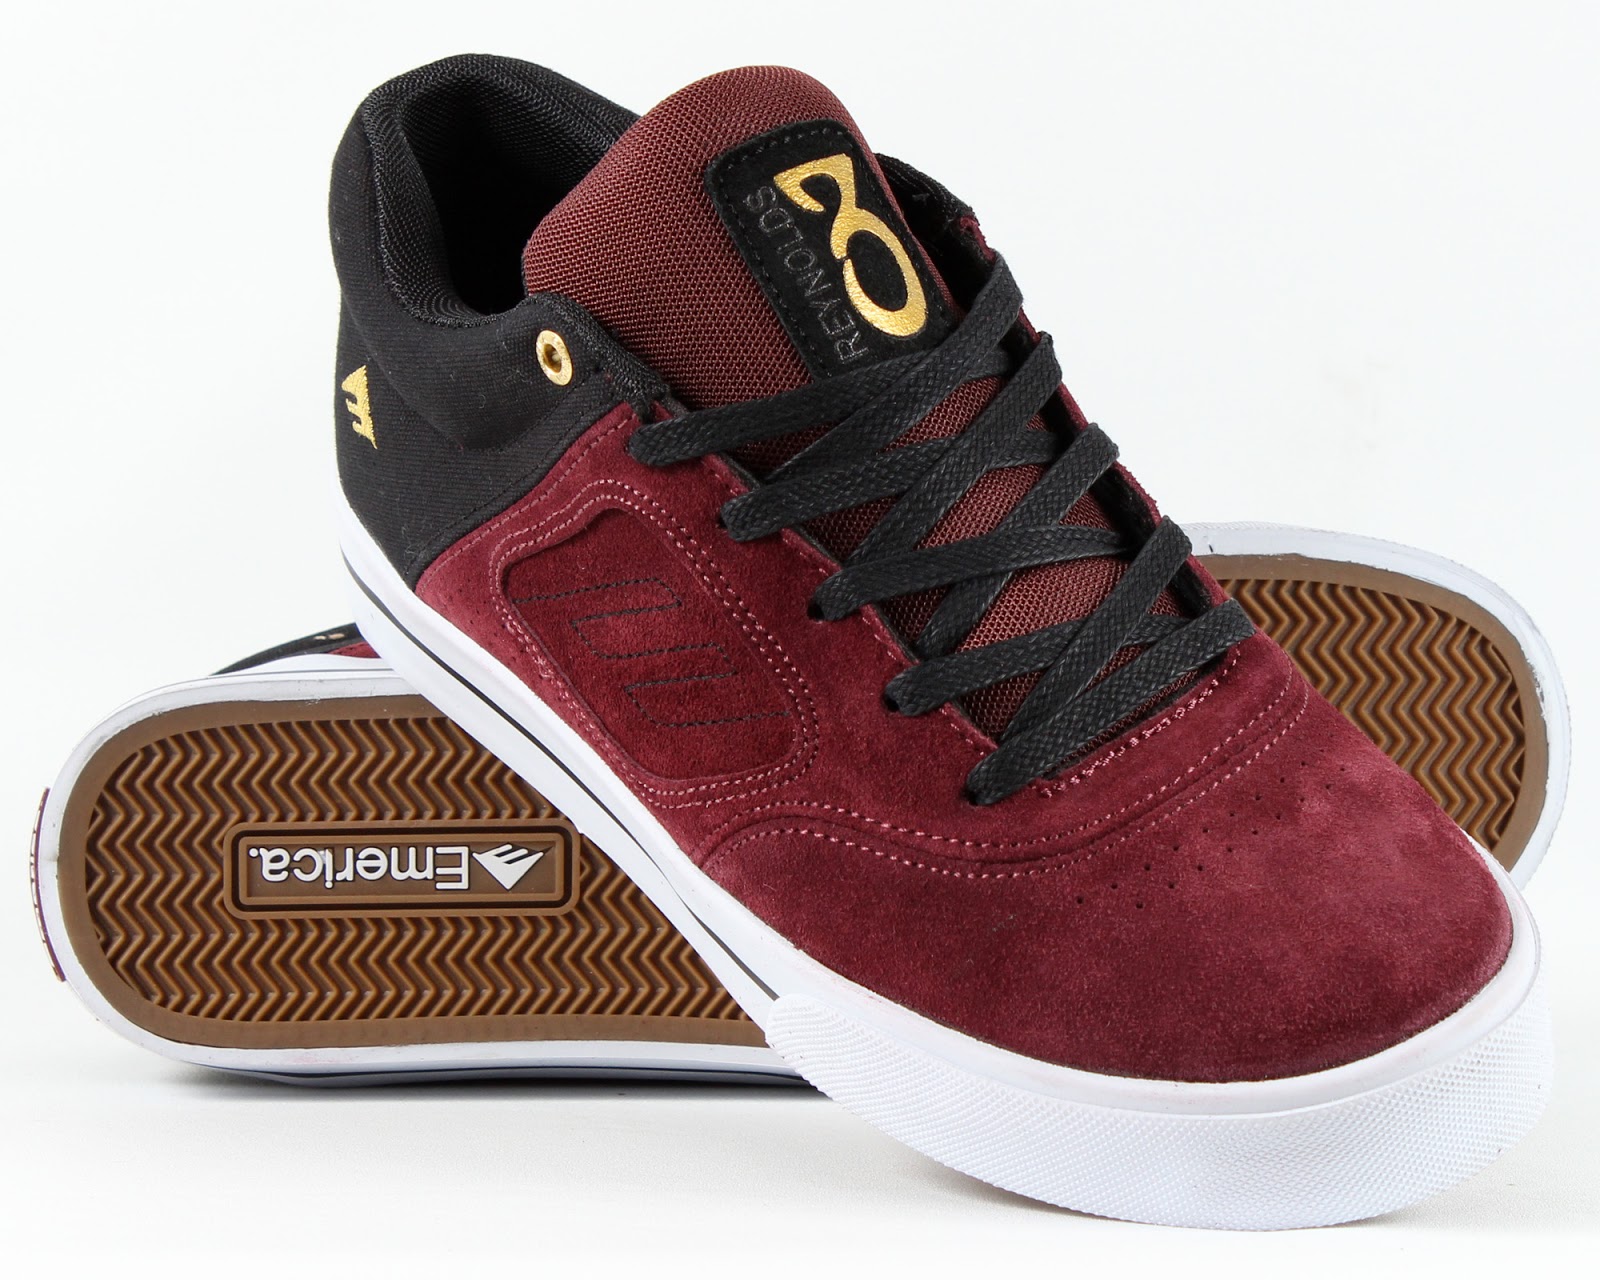 Emerica - New Styles Just In ~ REVOLUTION RIDE SHOP